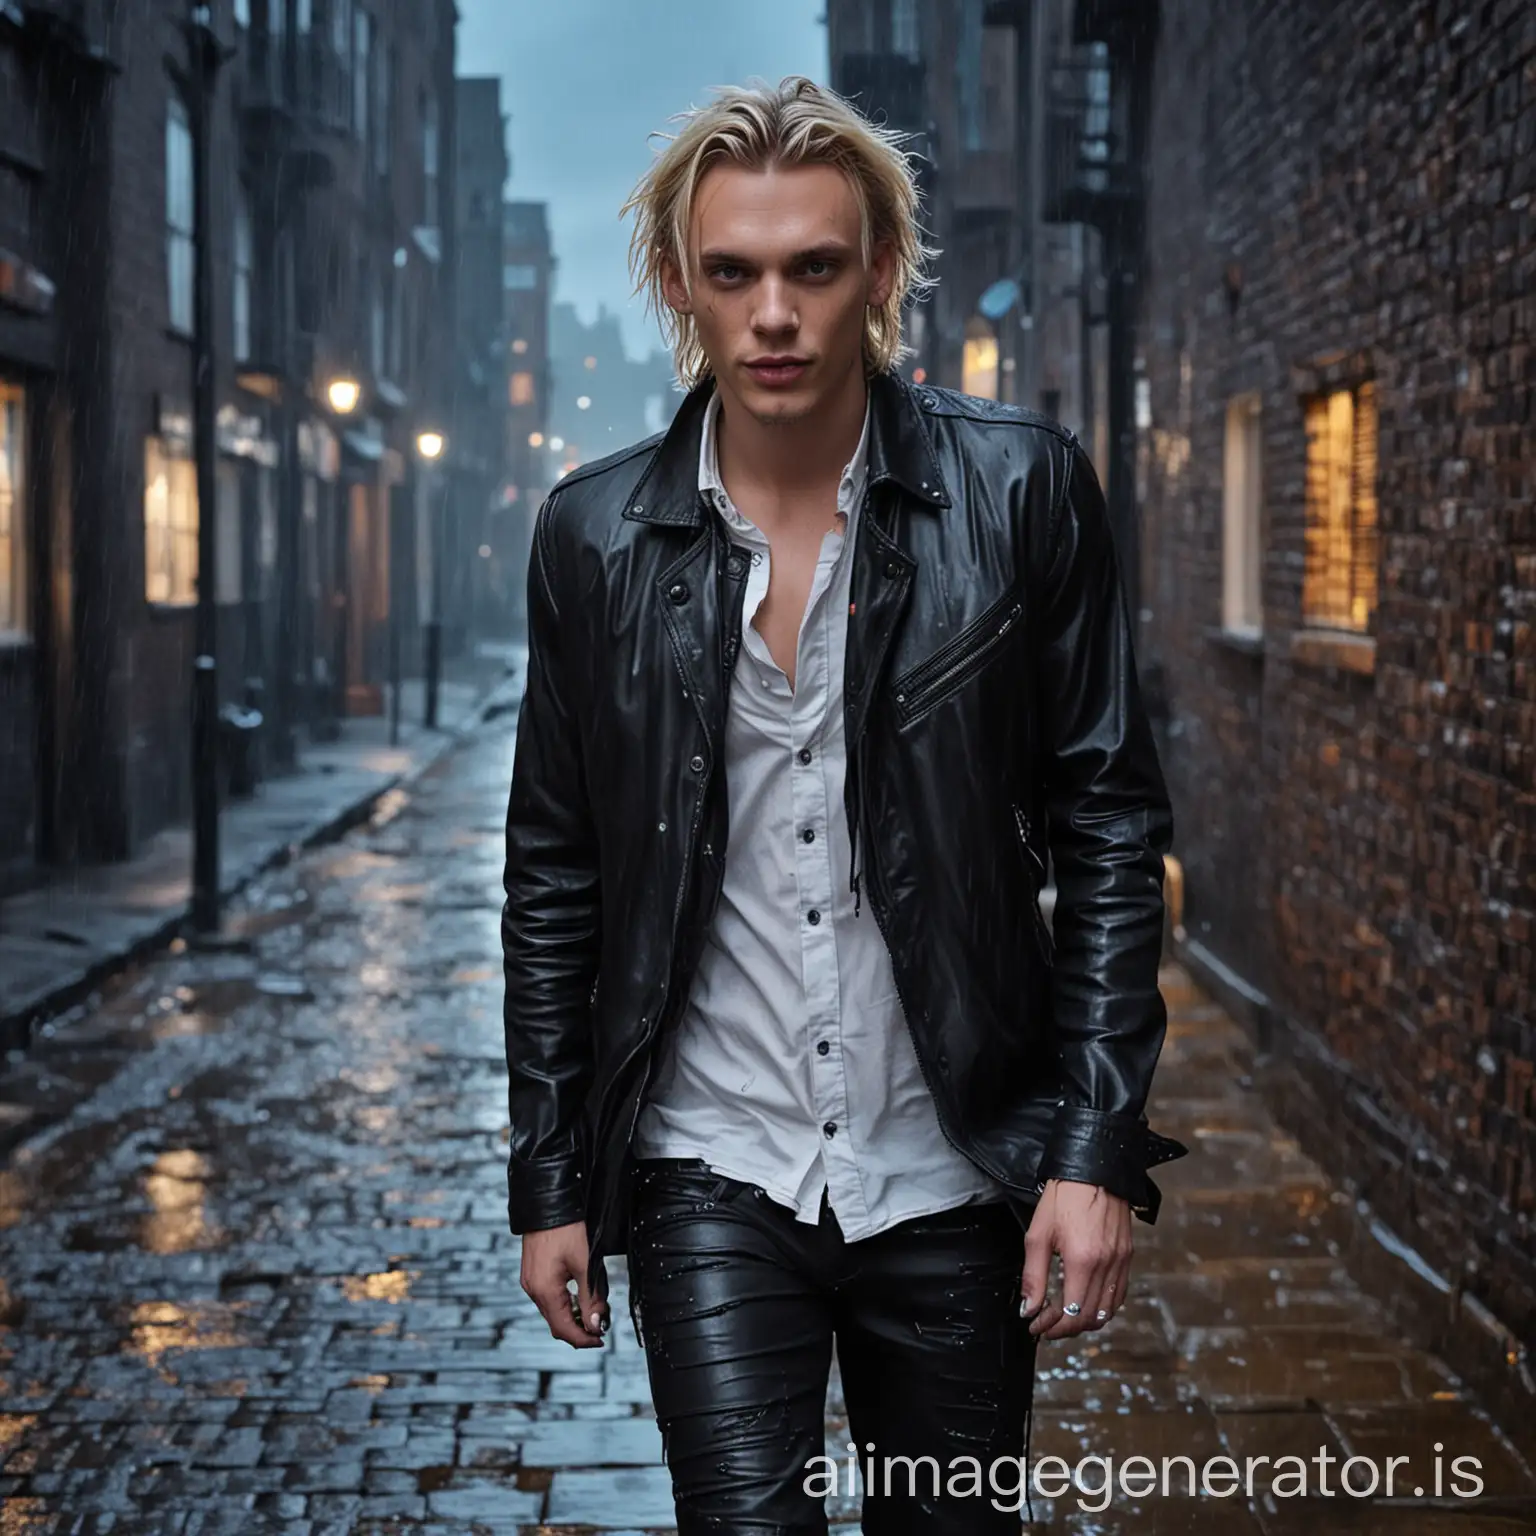 Jamie Campbell Bower face, beautiful bright blue eyes, platinum blonde hair, mischievous smiling face, wearing leather, unbuttoned shirt, city neon nightlights, grey brick buildings, walking towards you, wearing black boots, stormy clouds, foggy background, wet brickroad